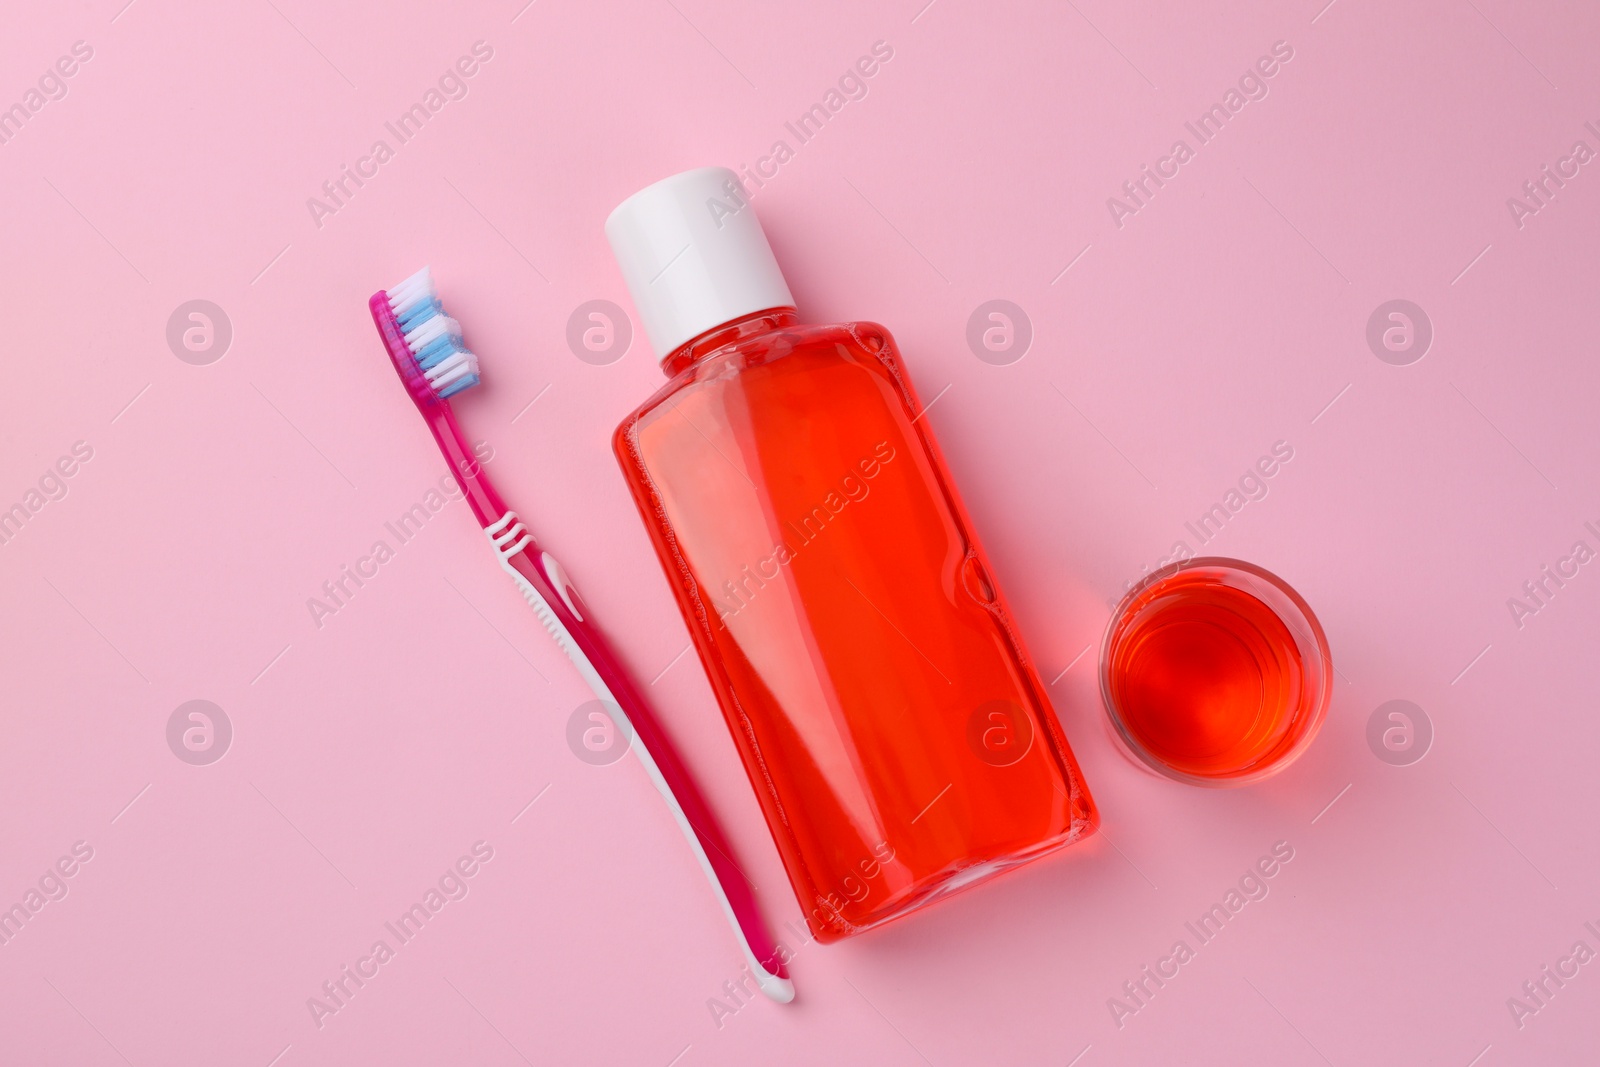 Photo of Fresh mouthwash in bottle, glass and toothbrush on pink background, flat lay